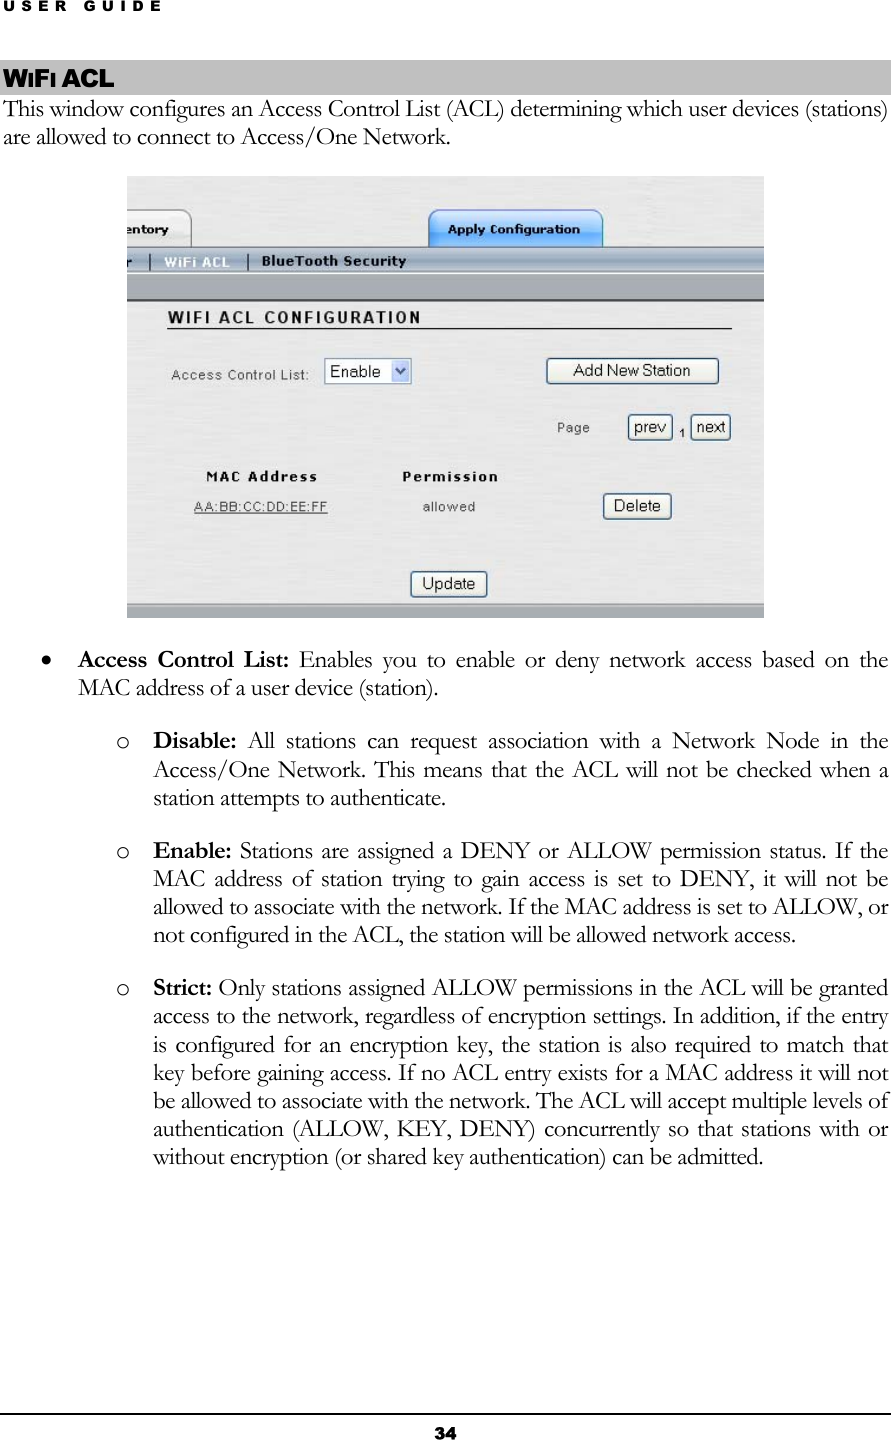 USER GUIDE WIFI ACL This window configures an Access Control List (ACL) determining which user devices (stations) are allowed to connect to Access/One Network.  • Access Control List: Enables you to enable or deny network access based on the MAC address of a user device (station). o Disable: All stations can request association with a Network Node in the Access/One Network. This means that the ACL will not be checked when a station attempts to authenticate. o Enable: Stations are assigned a DENY or ALLOW permission status. If the MAC address of station trying to gain access is set to DENY, it will not be allowed to associate with the network. If the MAC address is set to ALLOW, or not configured in the ACL, the station will be allowed network access. o Strict: Only stations assigned ALLOW permissions in the ACL will be granted access to the network, regardless of encryption settings. In addition, if the entry is configured for an encryption key, the station is also required to match that key before gaining access. If no ACL entry exists for a MAC address it will not be allowed to associate with the network. The ACL will accept multiple levels of authentication (ALLOW, KEY, DENY) concurrently so that stations with or without encryption (or shared key authentication) can be admitted.     34 